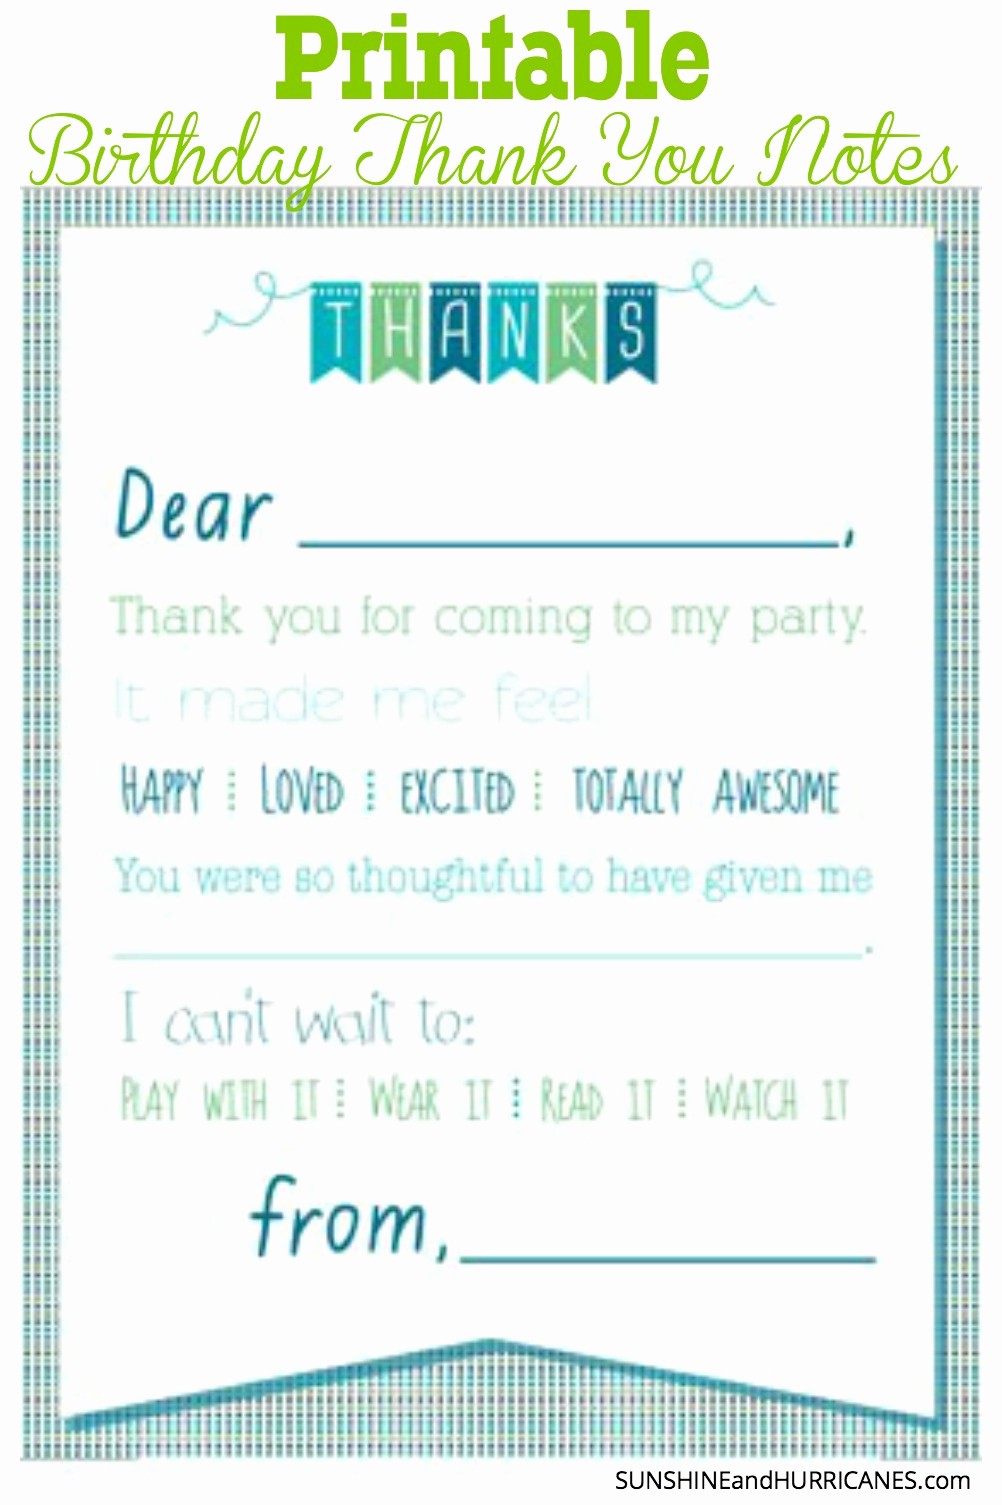 Printable Thank You Note Template Unique Printable Birthday Thank You Notes